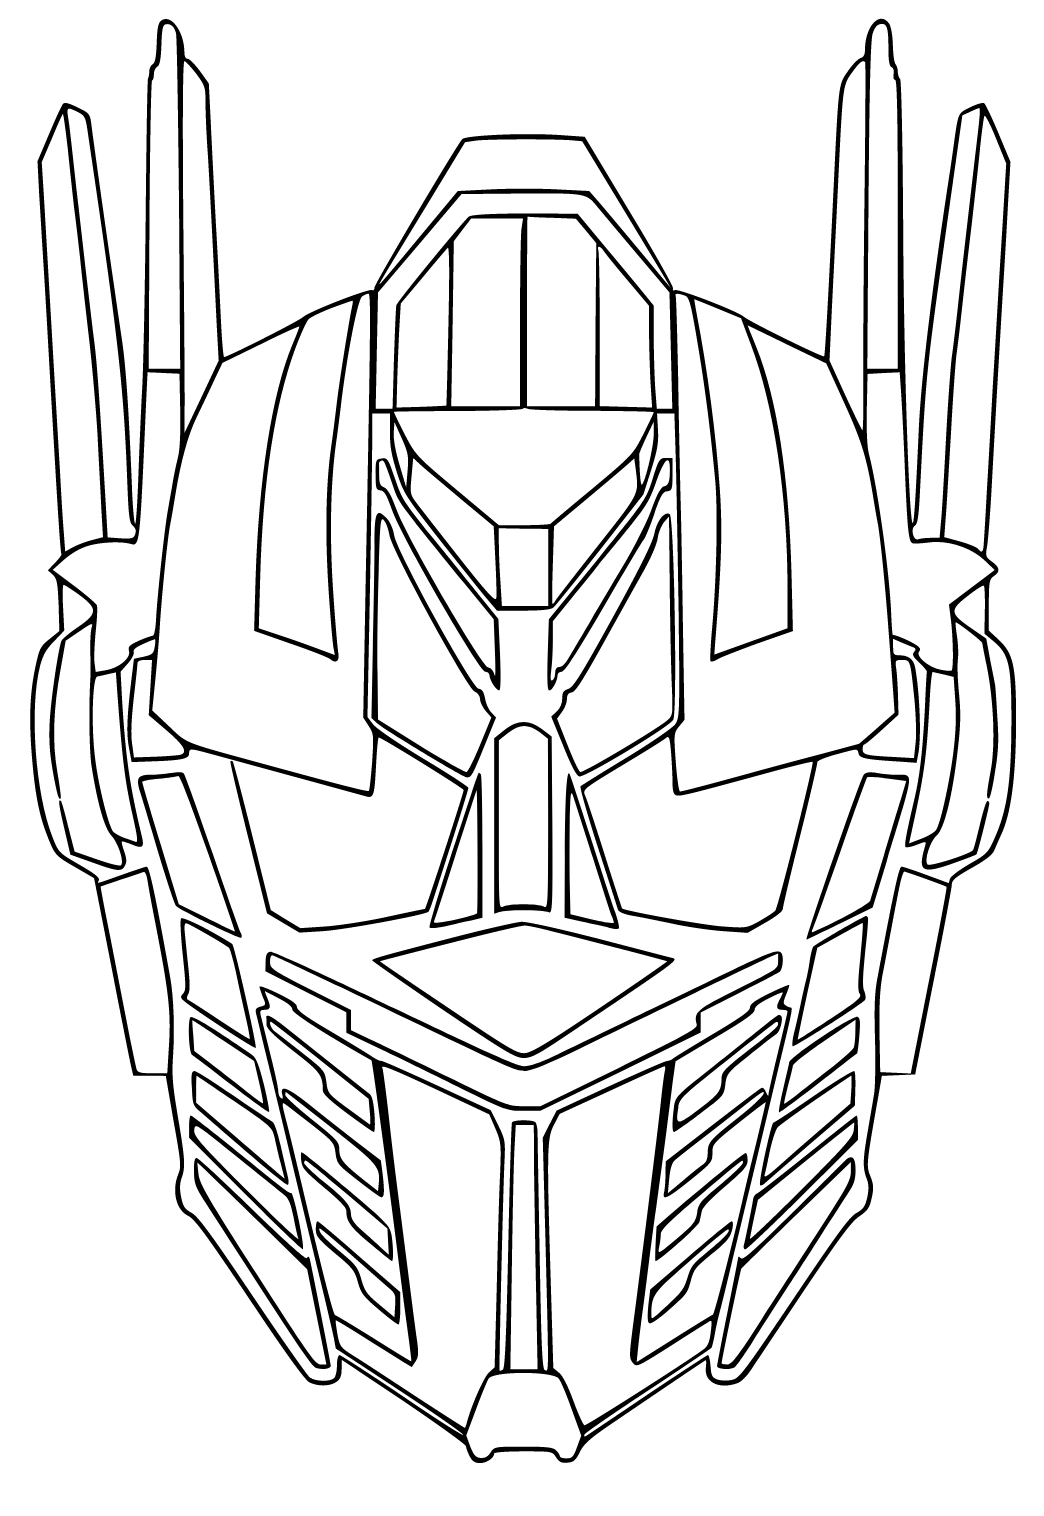 Free printable optimus prime mask coloring page for adults and kids